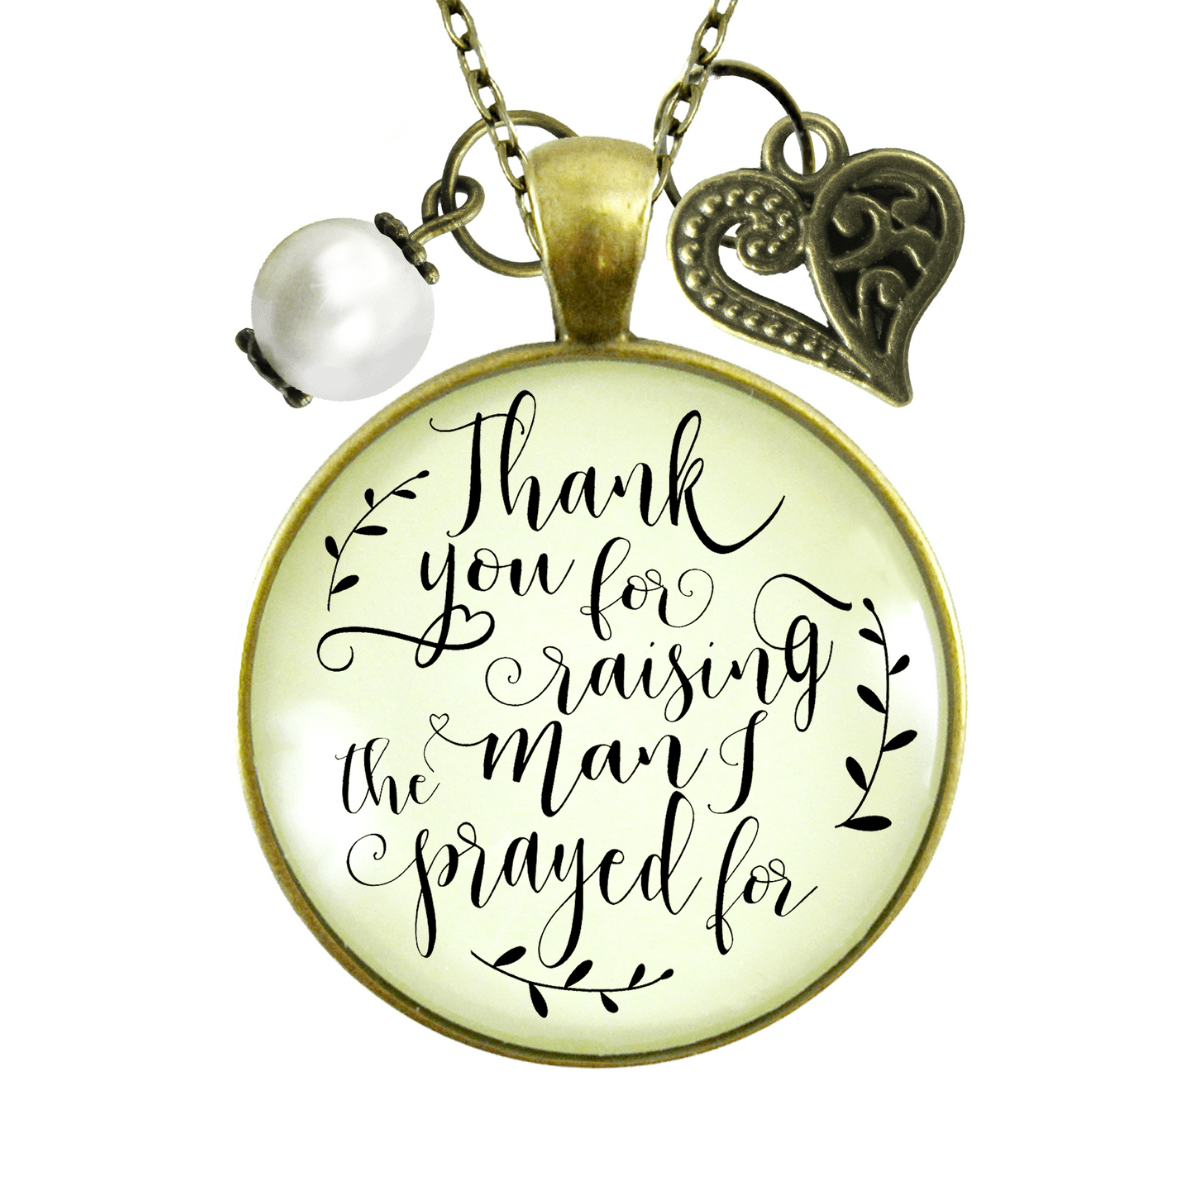 Gutsy Goodness To Her Mother in Law Necklace Thank You Man I Prayed For Christian Wedding Gift - Gutsy Goodness Handmade Jewelry;To Her Mother In Law Necklace Thank You Man I Prayed For Christian Wedding Gift - Gutsy Goodness Handmade Jewelry Gifts